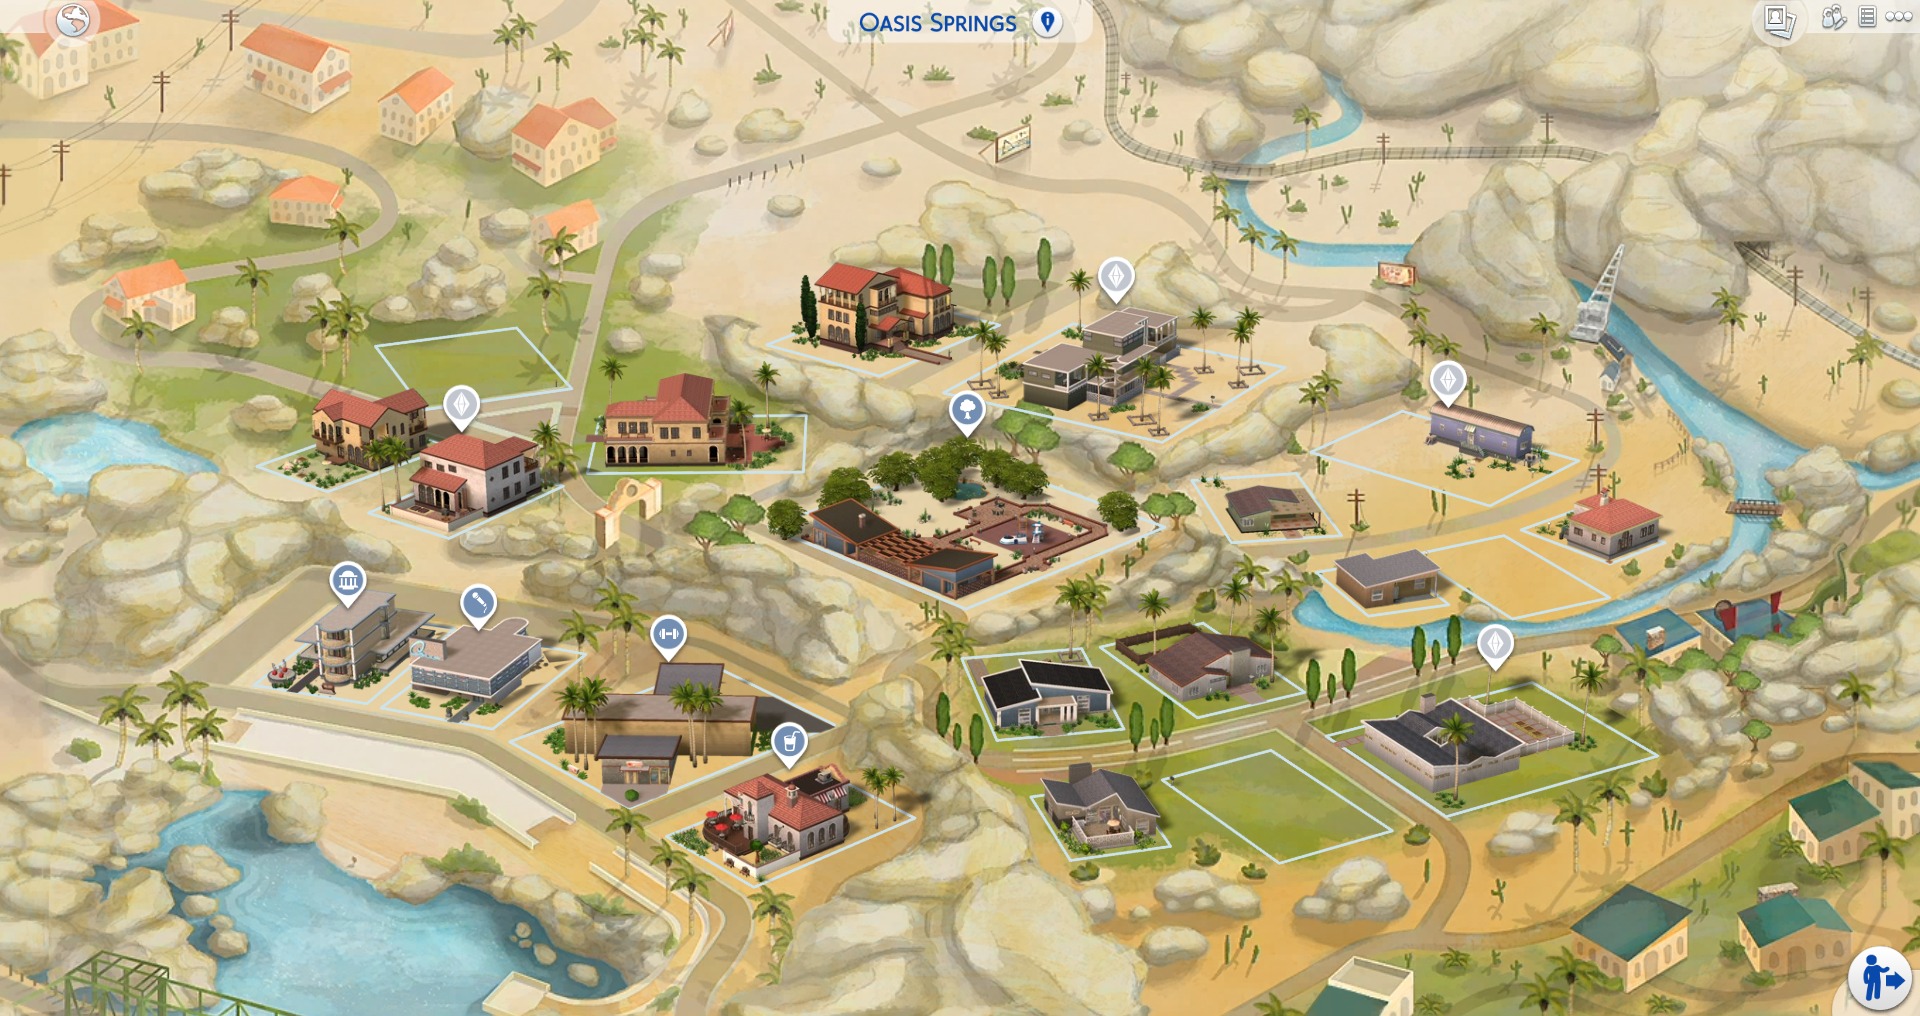 Sims 3 Custom Worlds Download